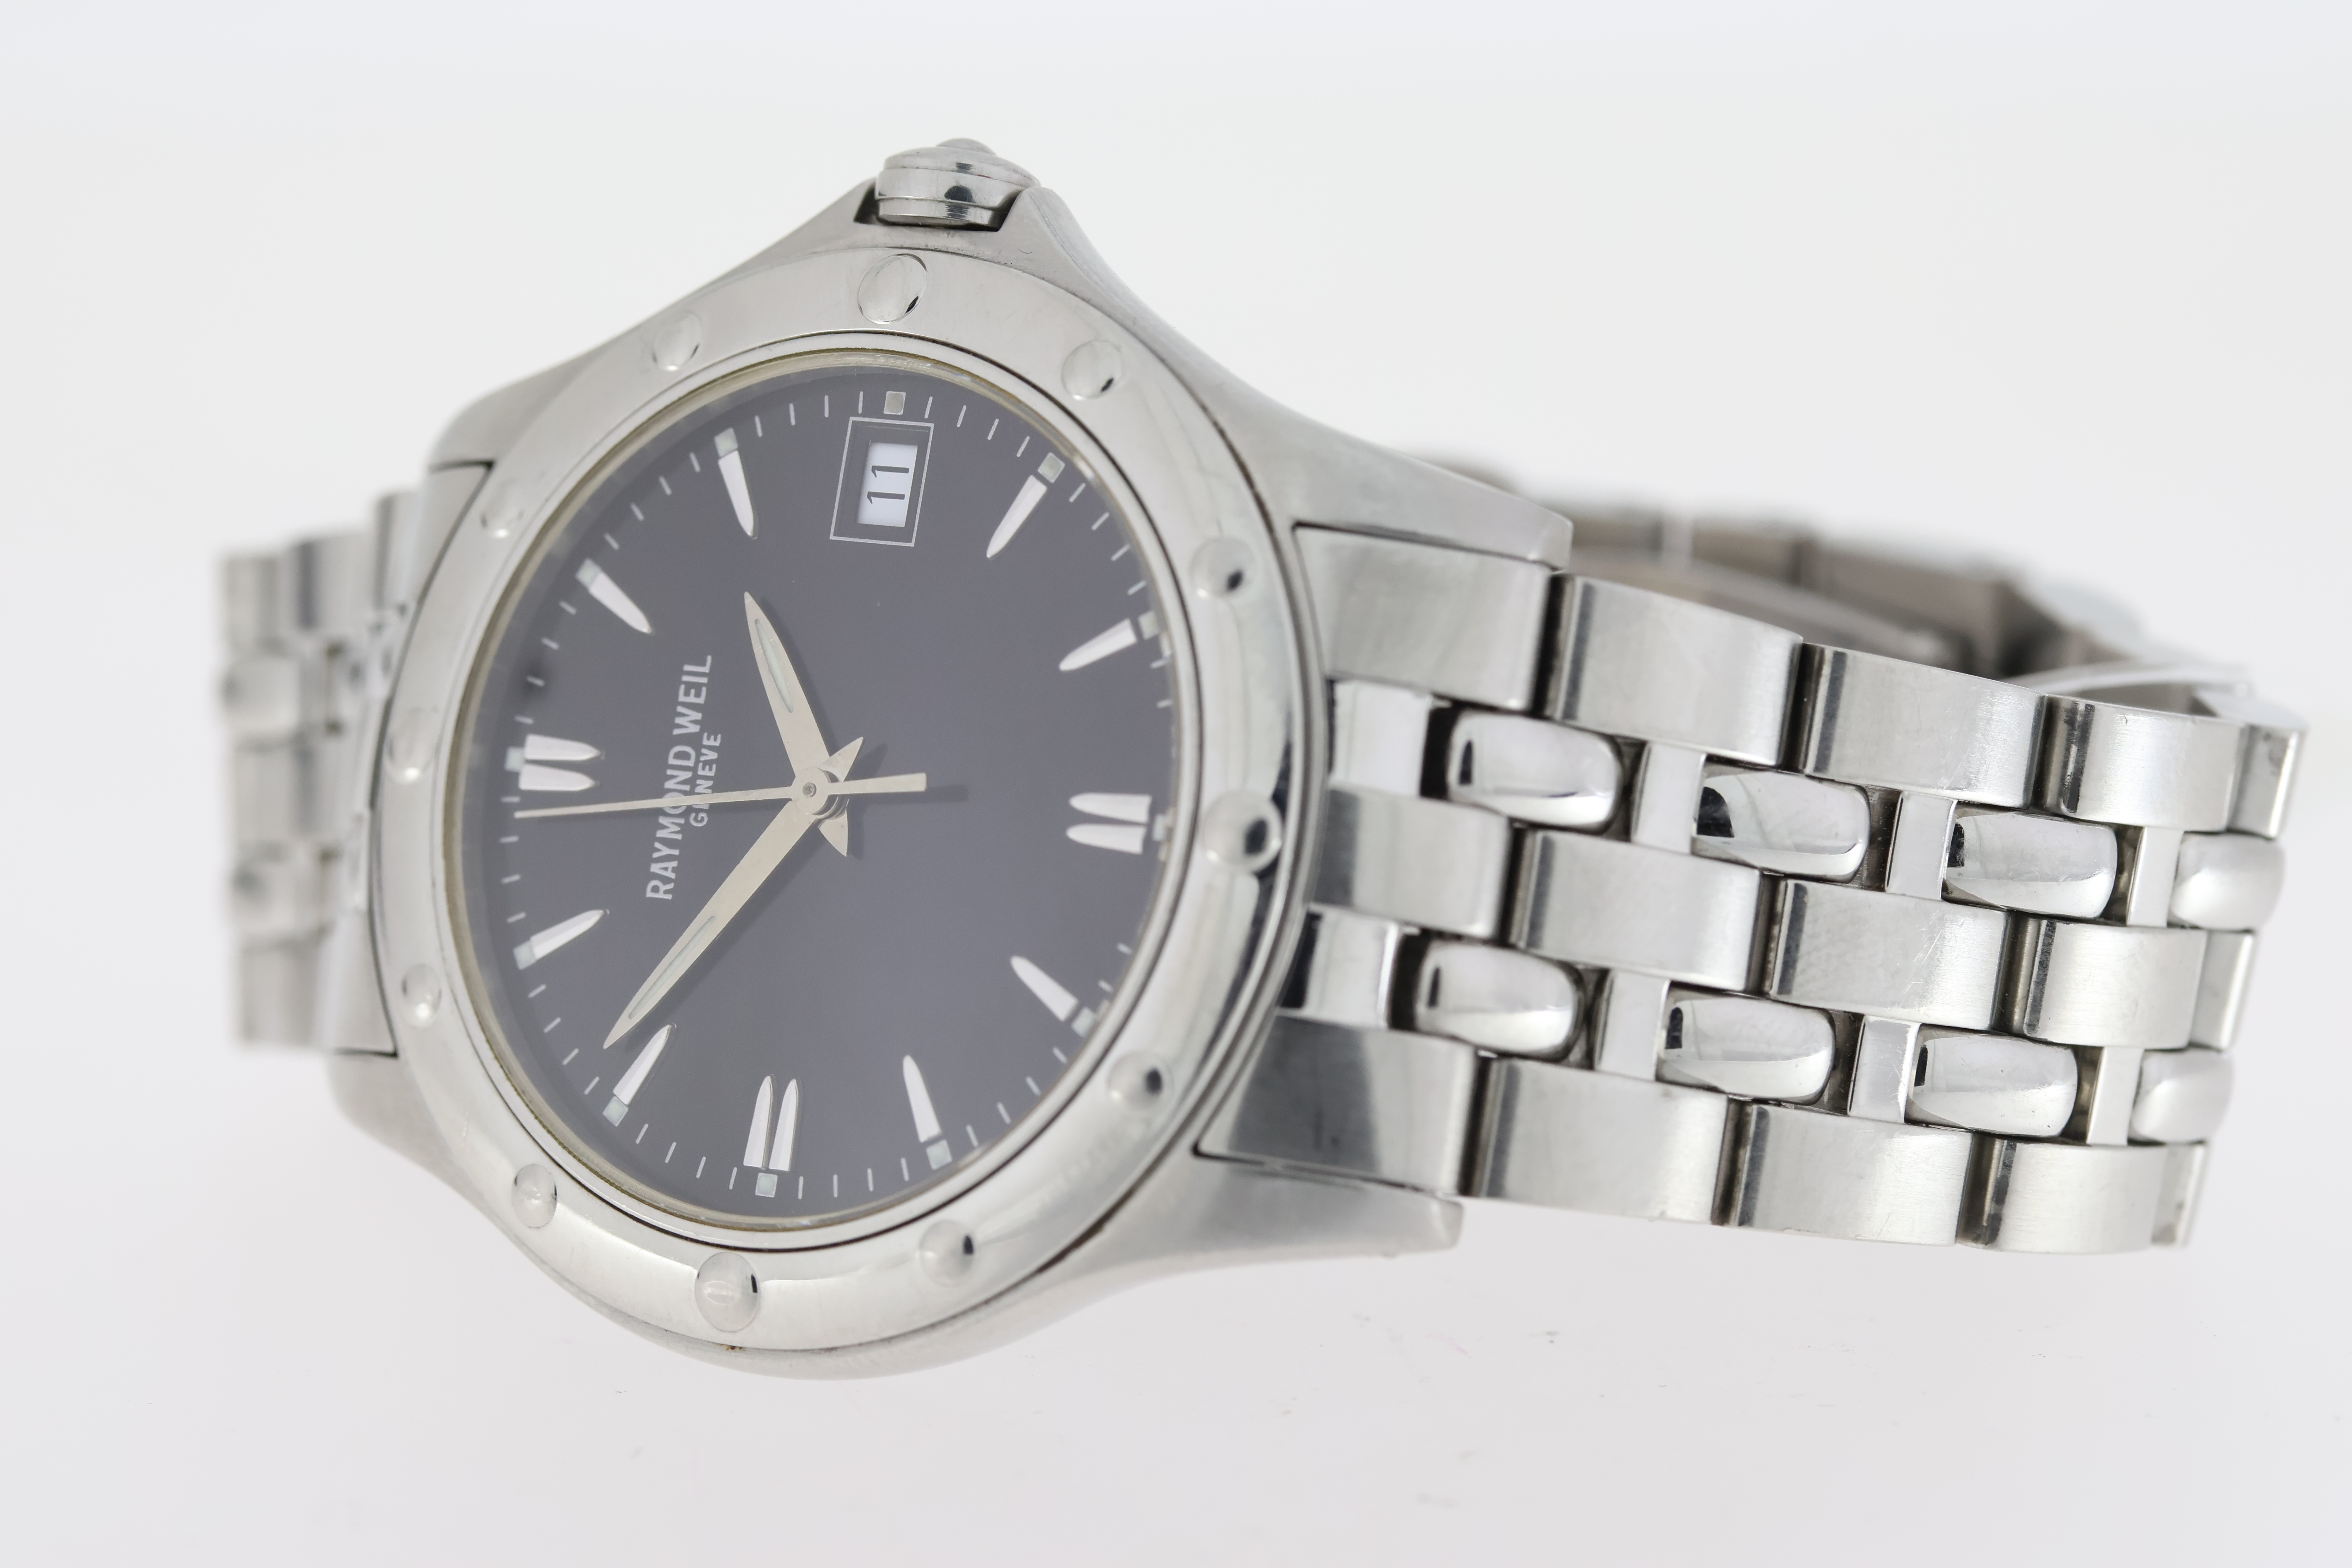 RAYMOND WEIL TANGO QUARTZ WATCH REFERENCE 5590, Approx 38mm stainless steel case with a snap on case - Image 2 of 3